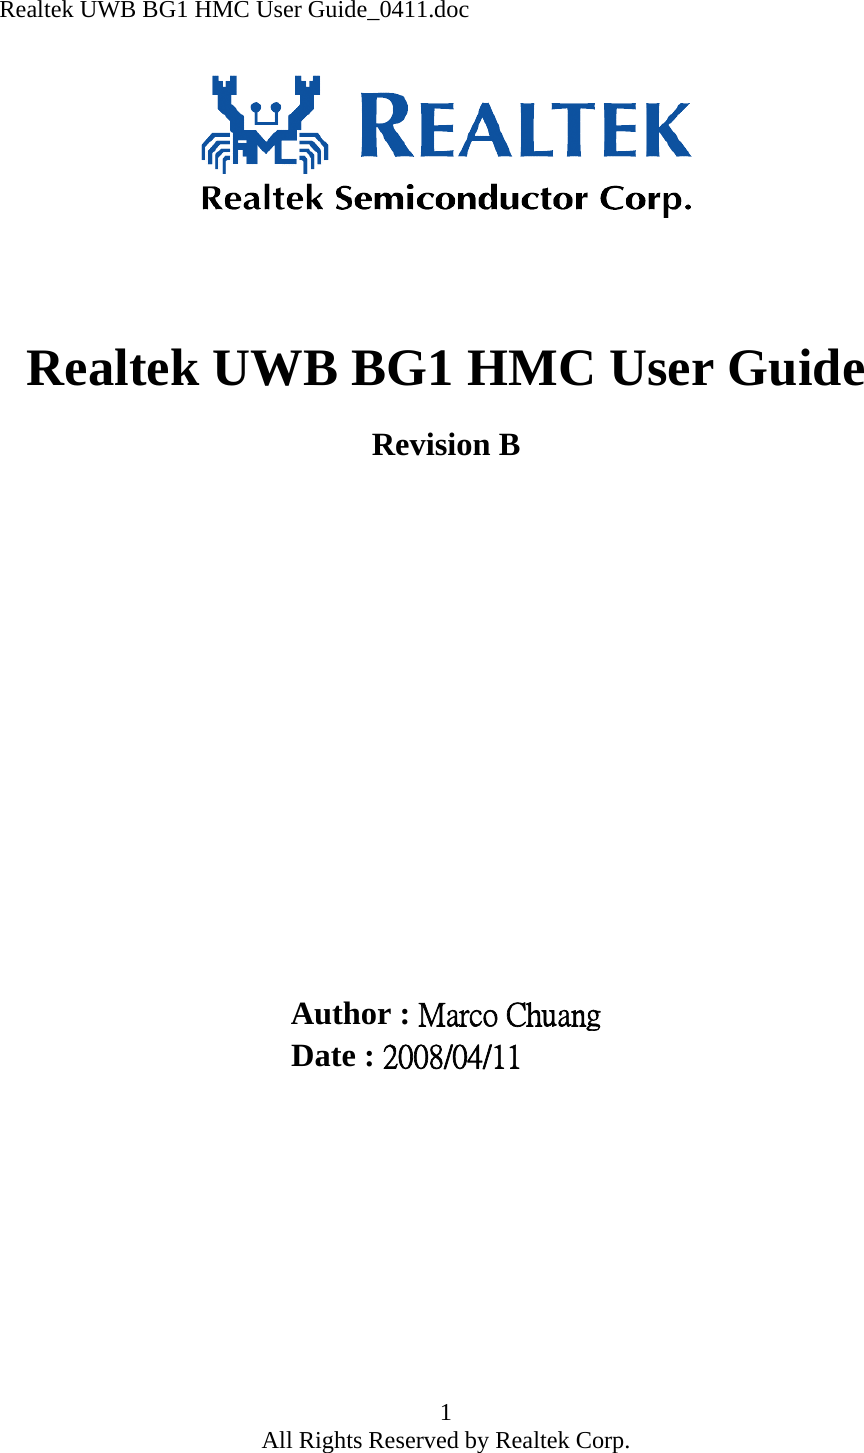 Realtek UWB BG1 HMC User Guide_0411.doc 1 All Rights Reserved by Realtek Corp.       Realtek UWB BG1 HMC User Guide   Revision B                    Author : Marco Chuang                                     Date : 2008/04/11    